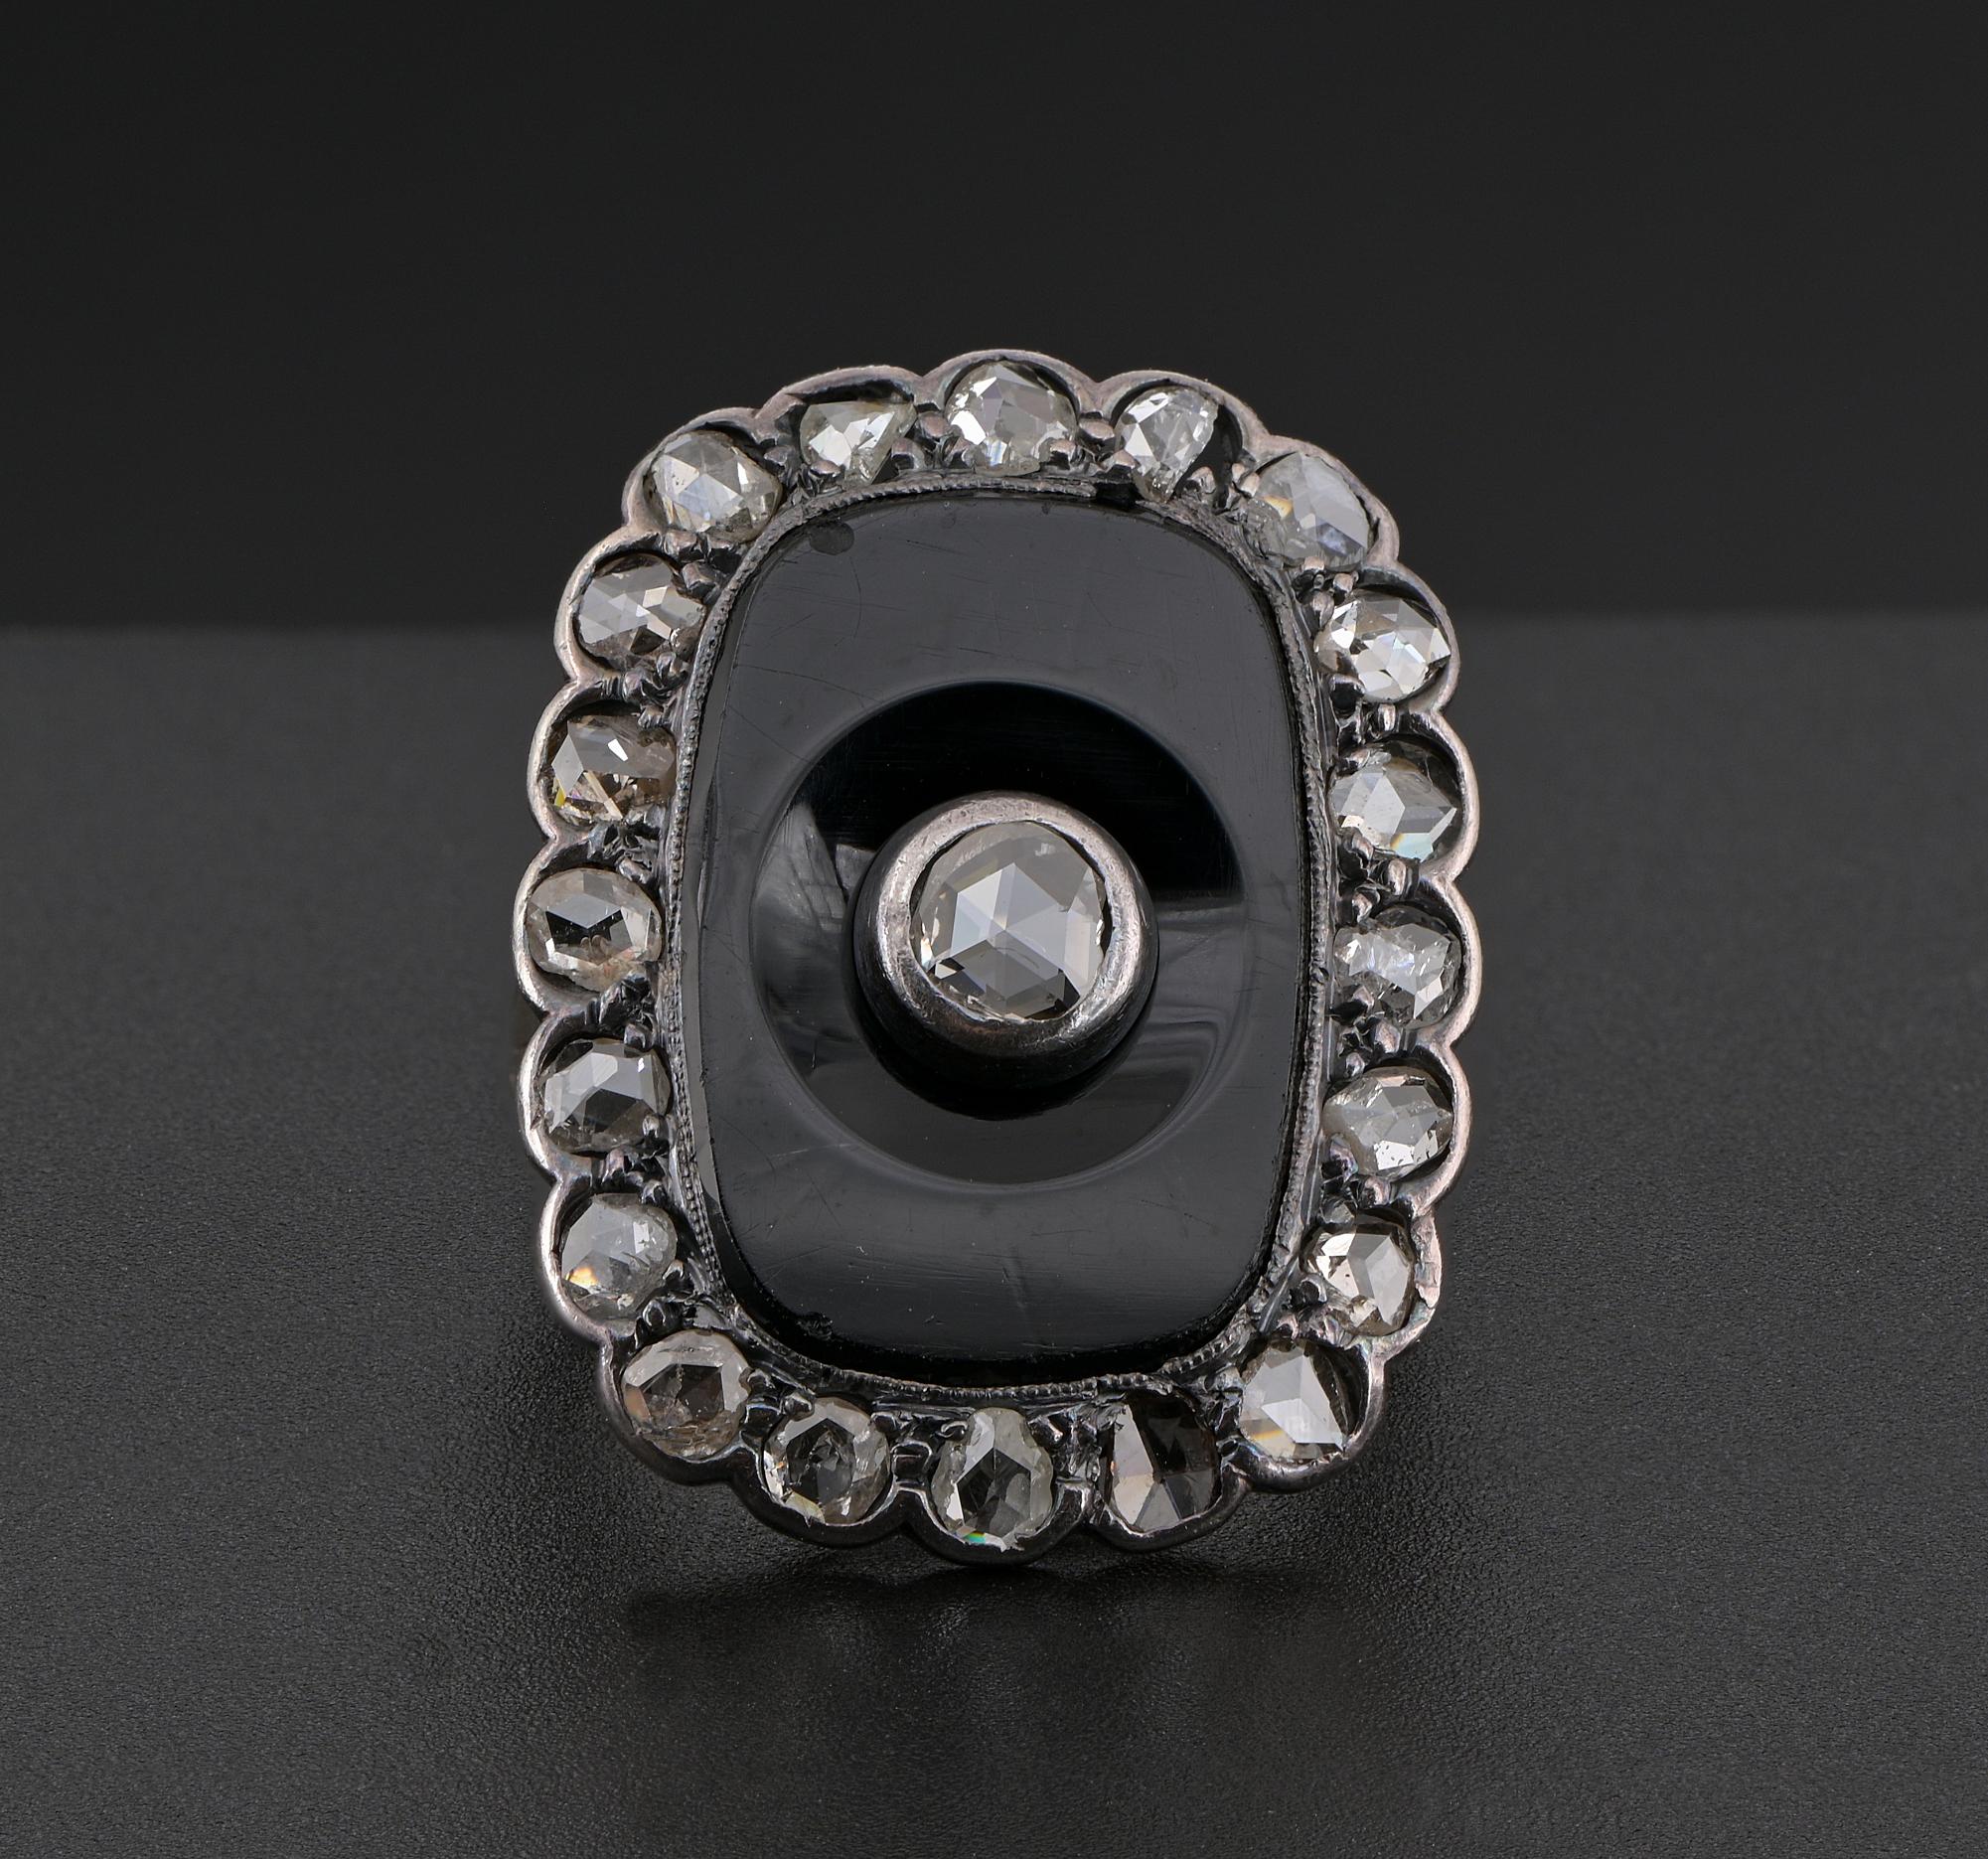 This beautiful Black Onyx and Diamond ring is 1890 ca
Skillful hand crafted throughout of solid 18 Kt gold with some silver portion
Fantastic wide panel design expressed on a hand carved Black Onyx plaque highlighted by a center Rose cut Diamond